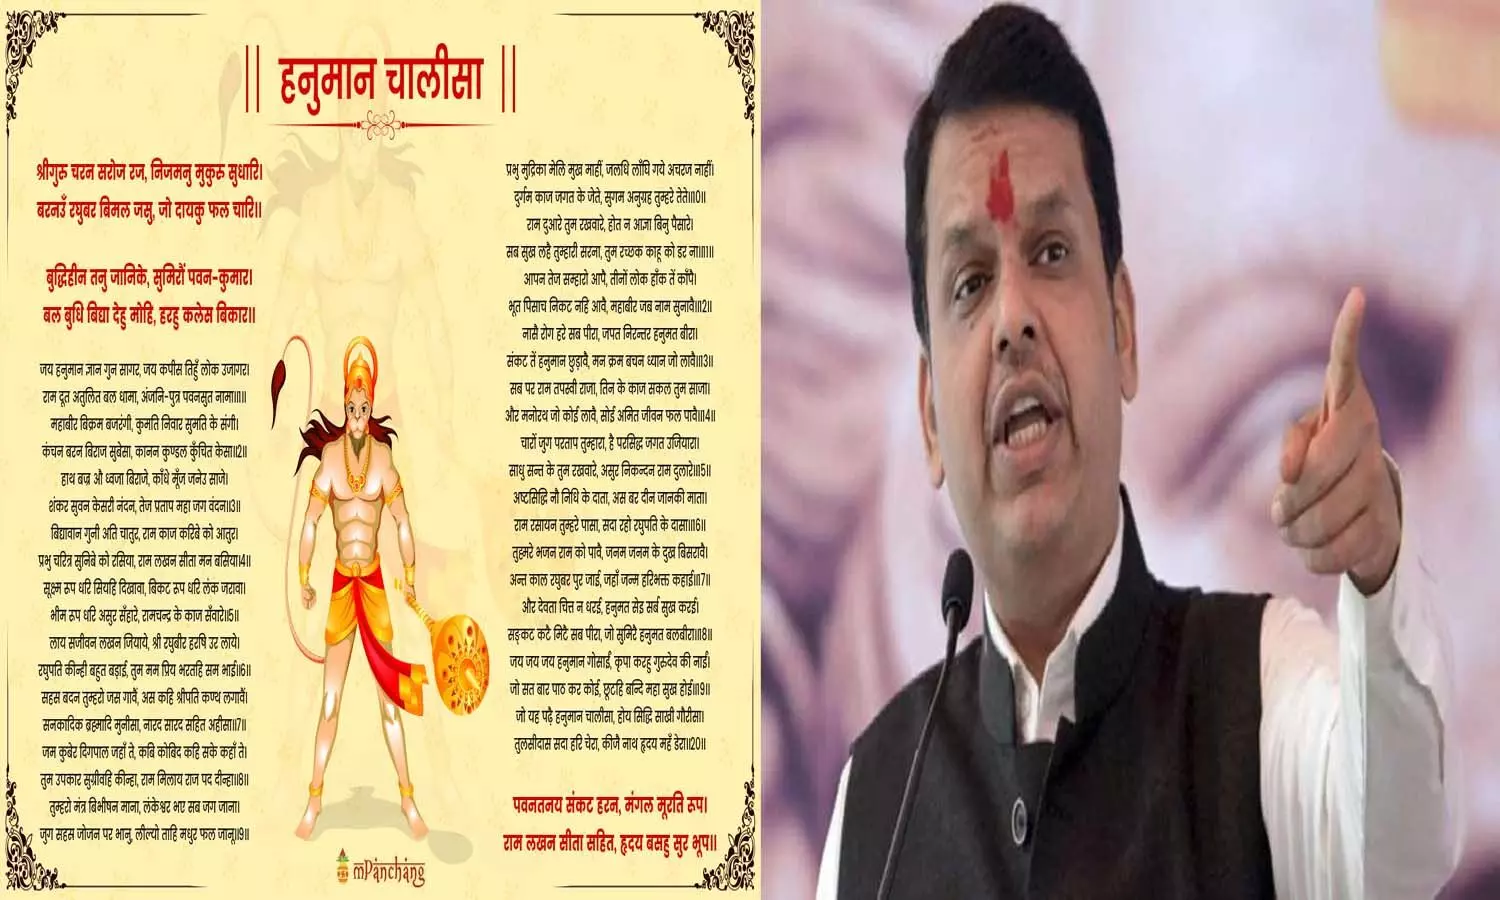 Devendra Fadnavis challenged the government, said we will read Hanuman Chalisa, show the government by sedition case